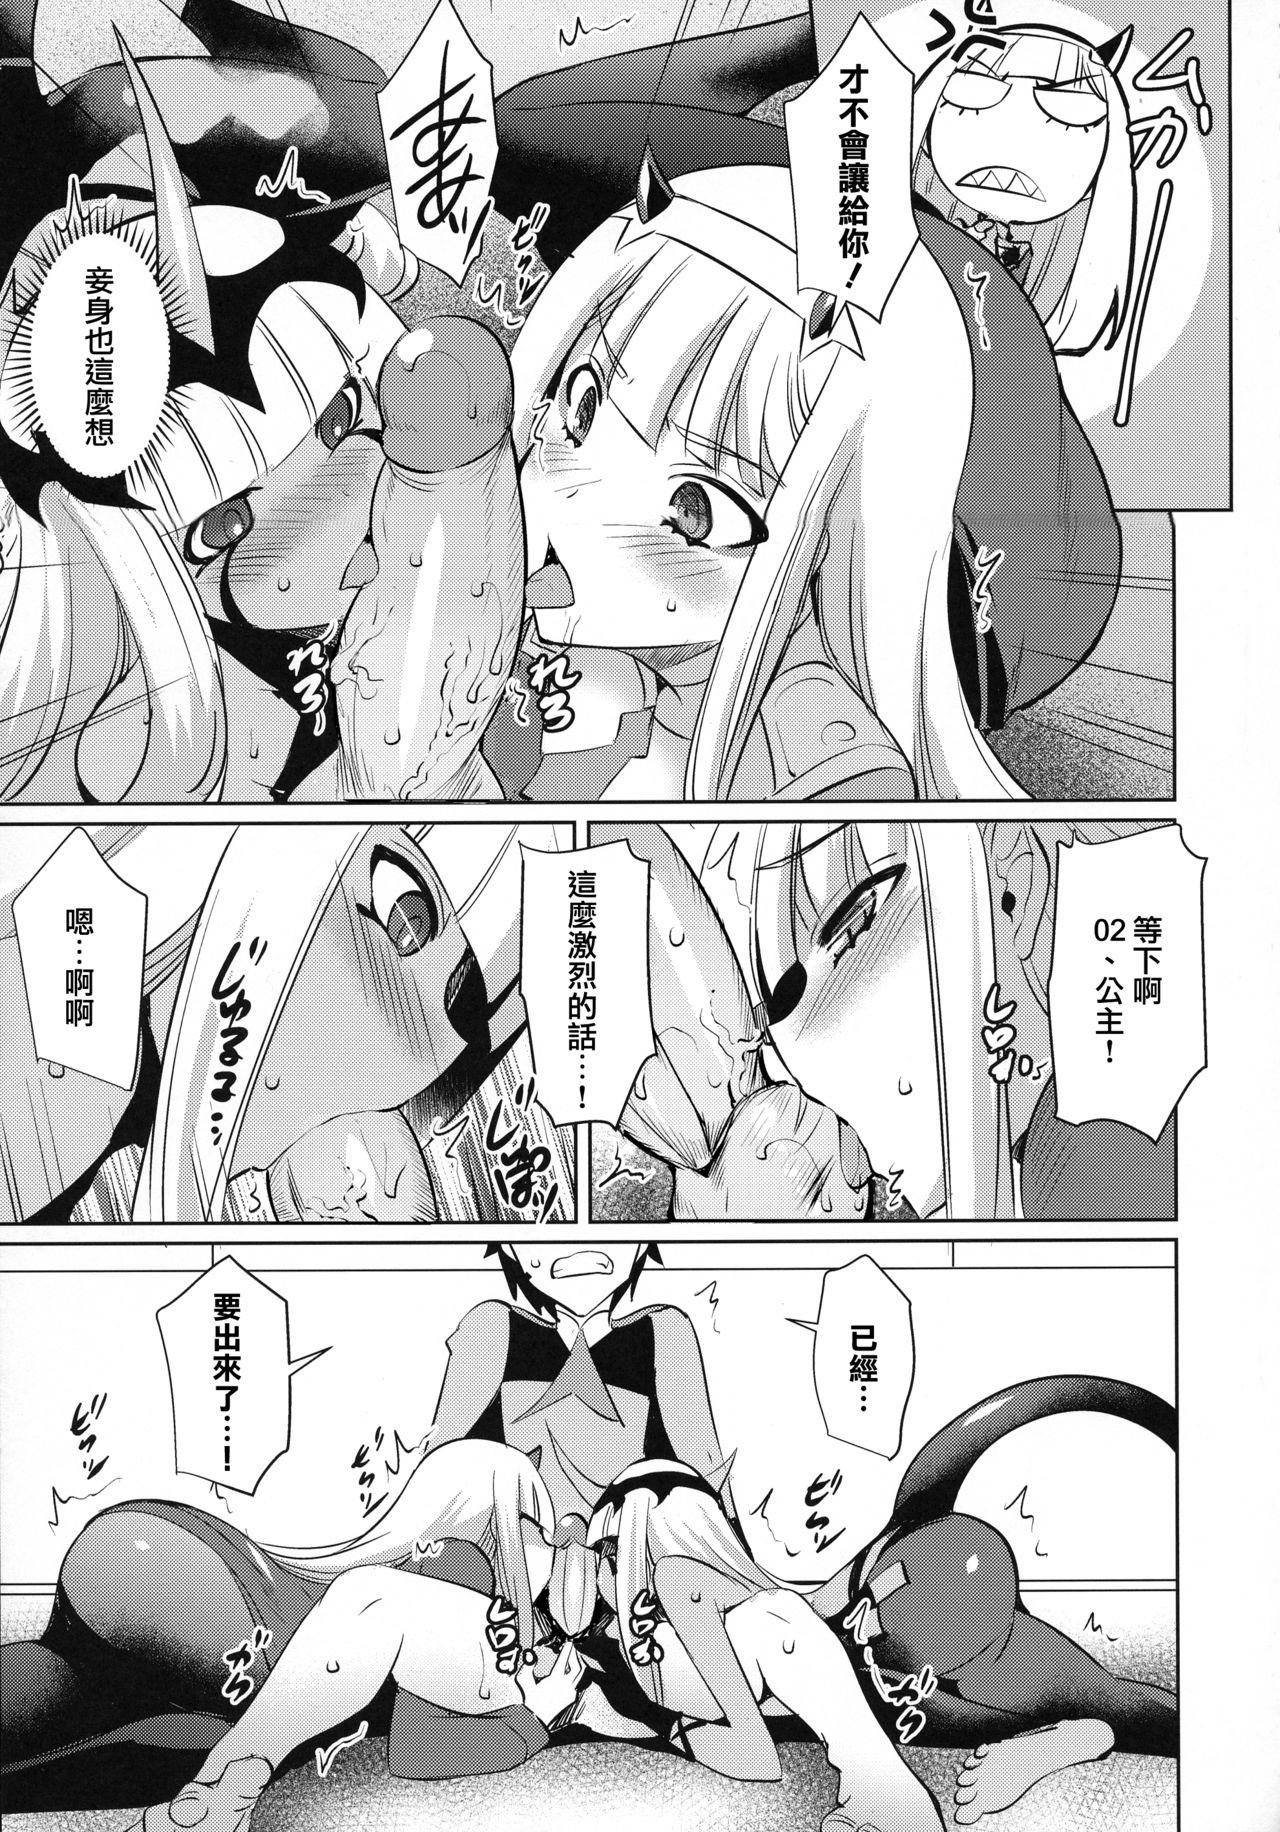 Tiny Tits Darling in the One and Two - Darling in the franxx Moneytalks - Page 8